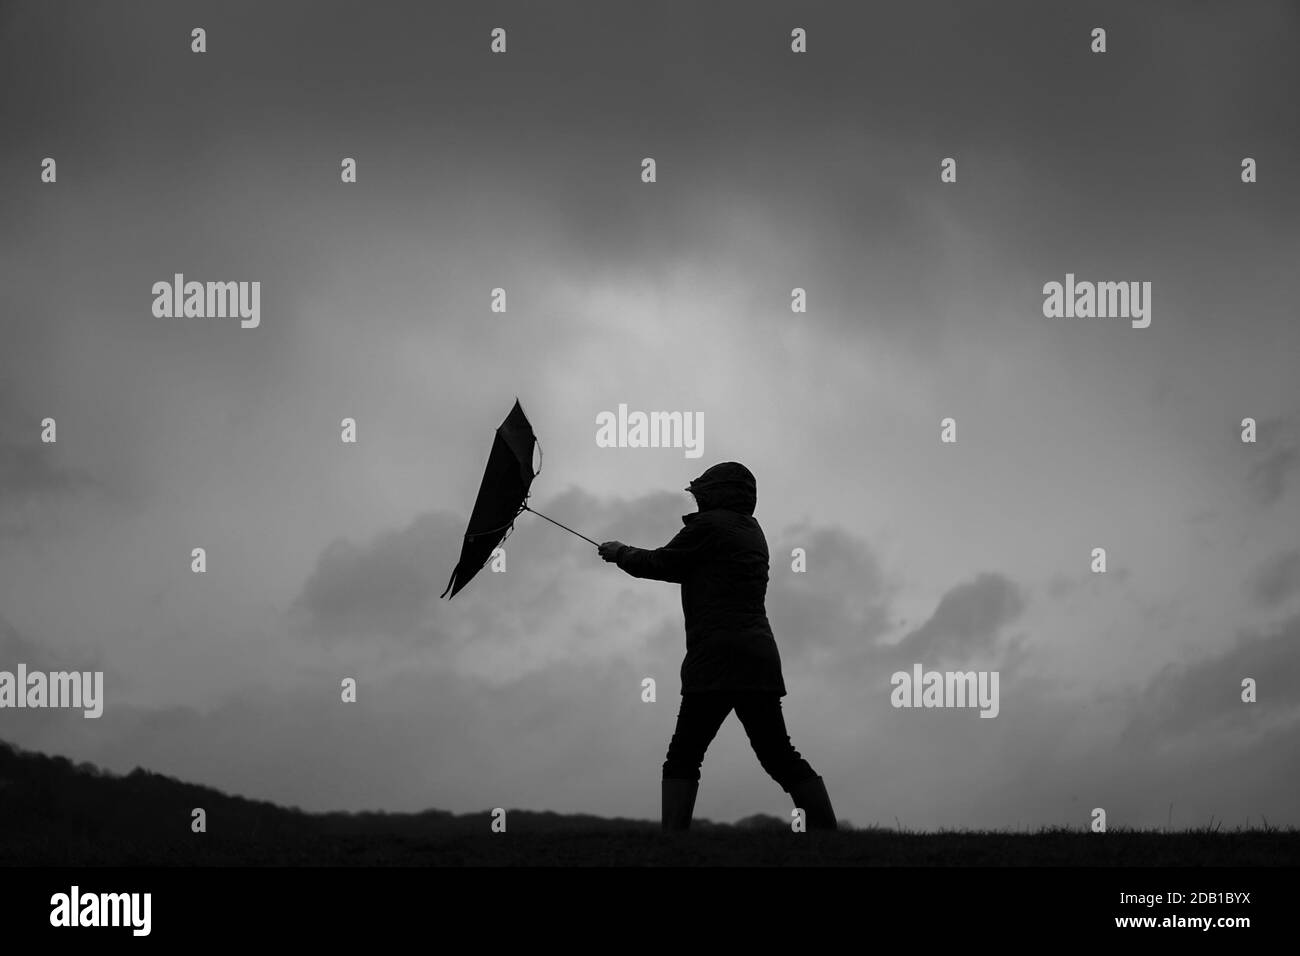 Mono side view of isolated woman struggling with umbrella, strong wind blowing brolly inside out, silhouetted against dark storm clouds. Stock Photo